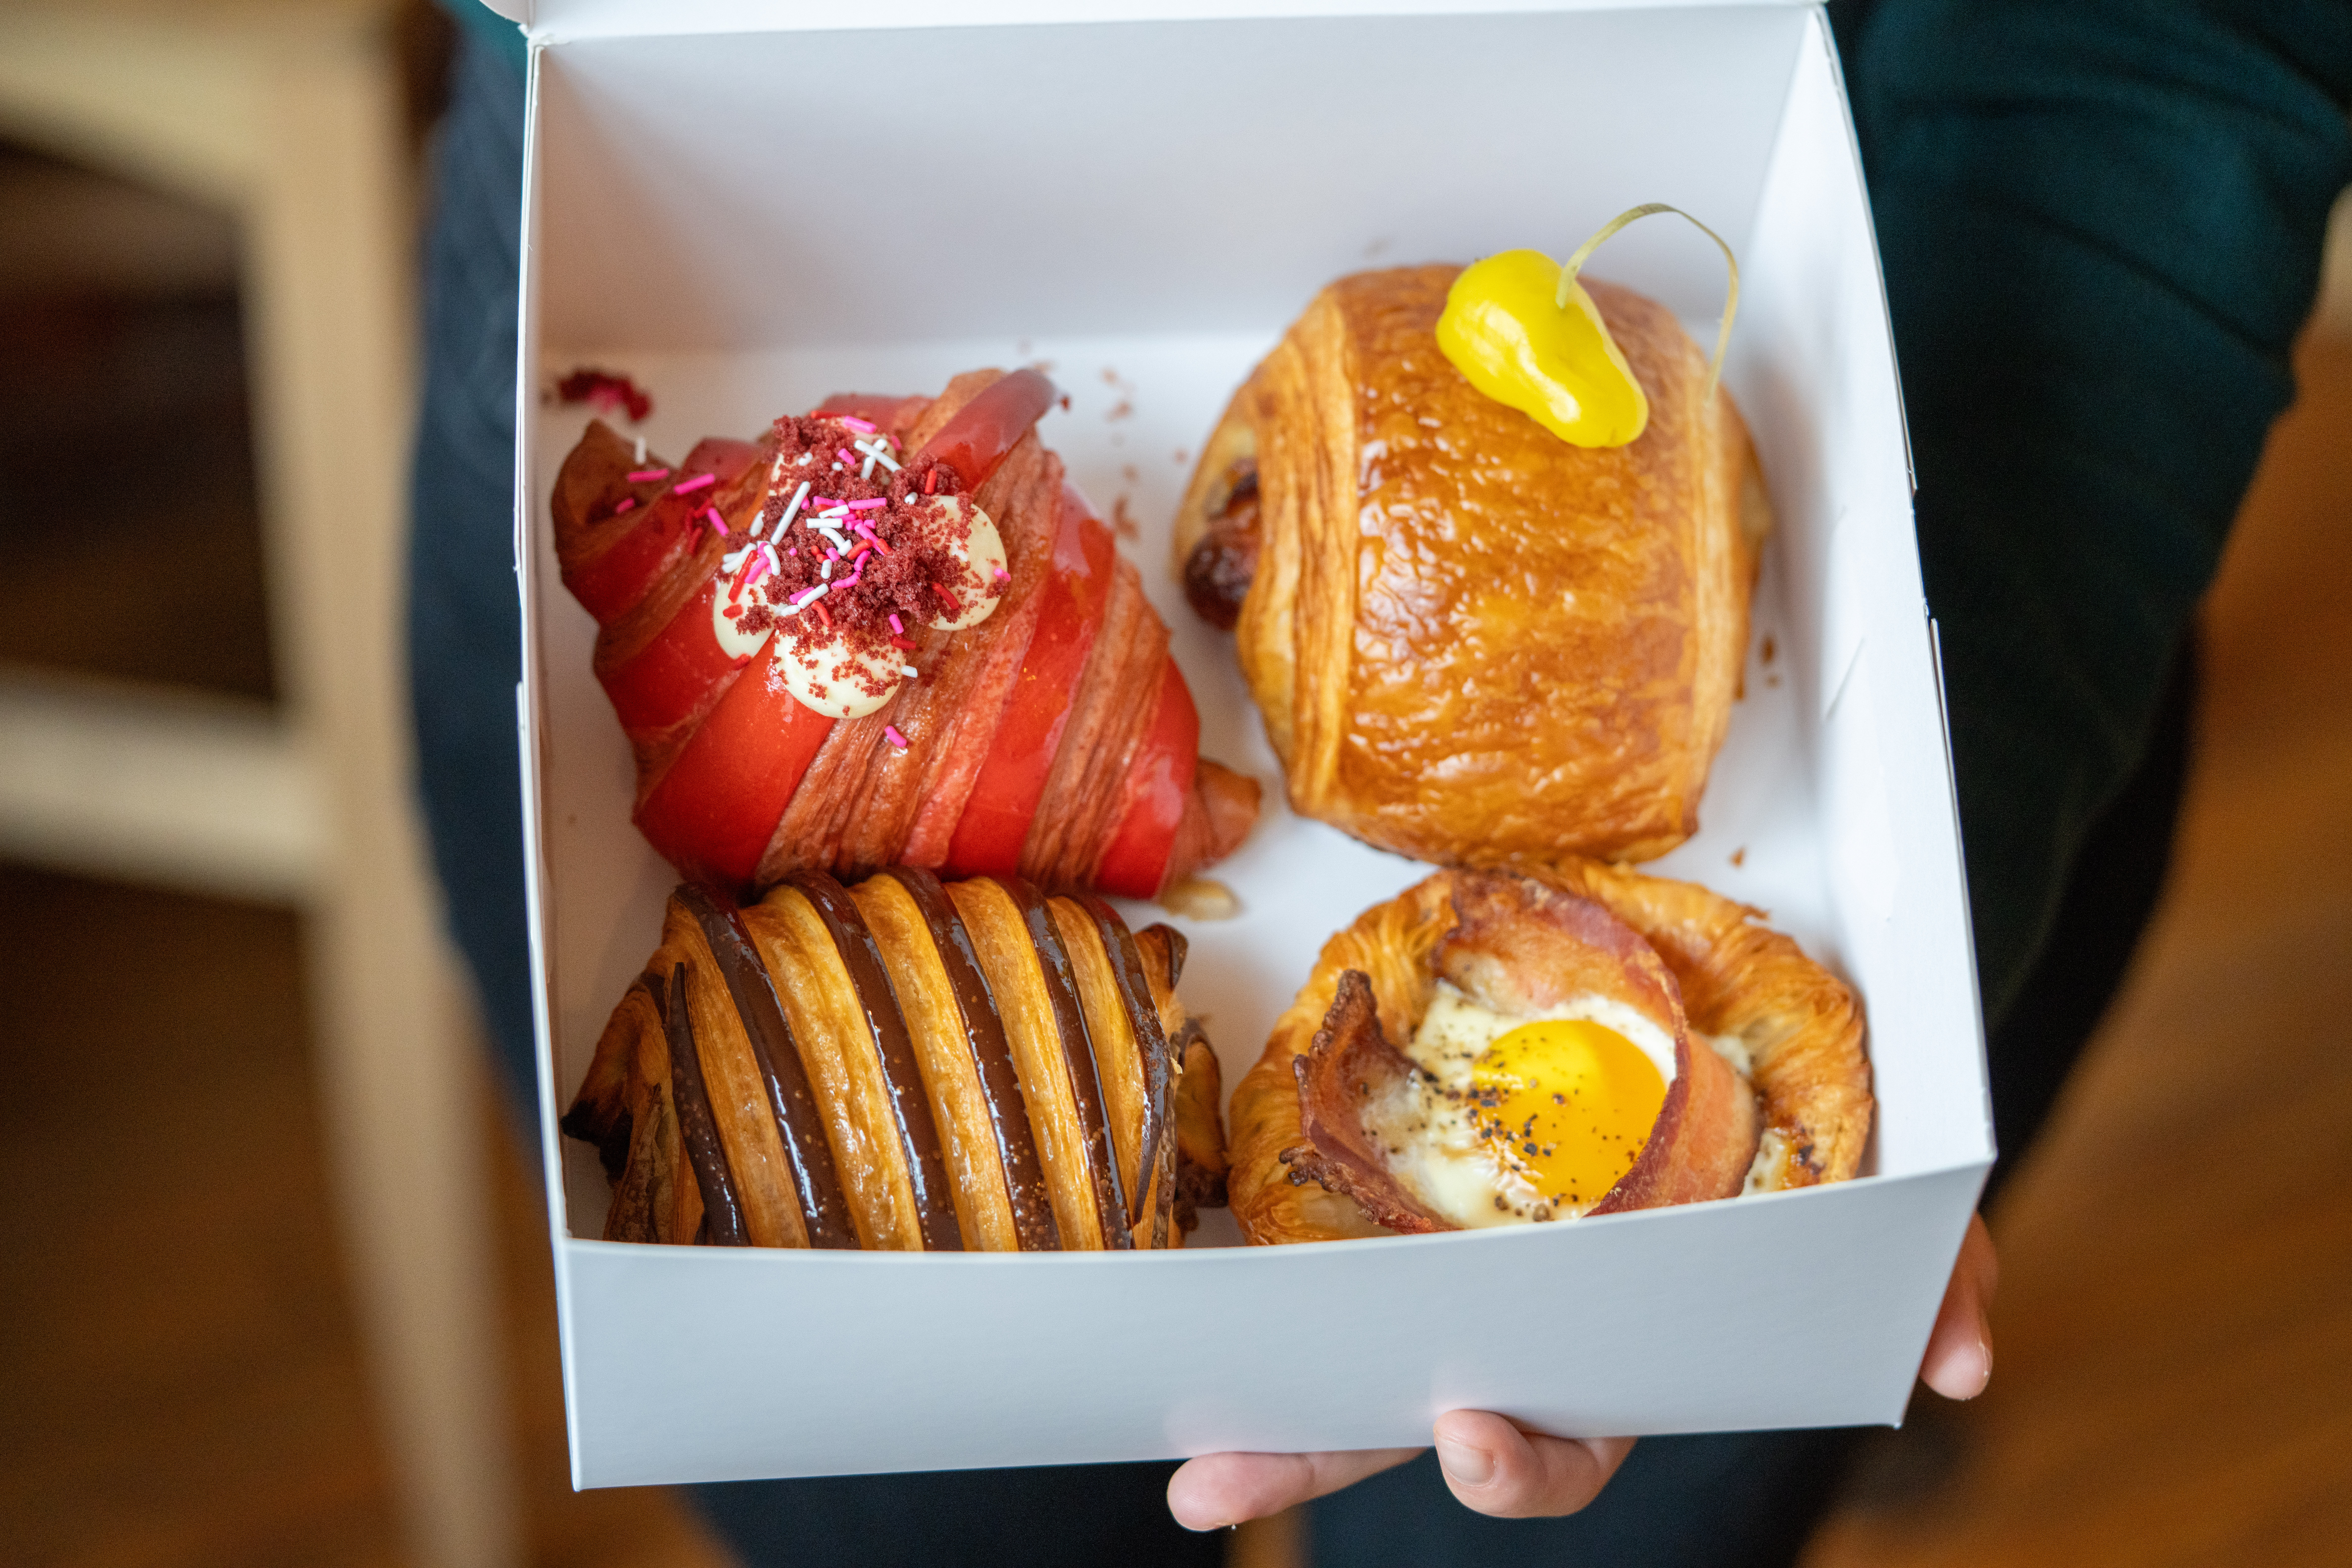 hands holding open a box of elegantly decorated pastries